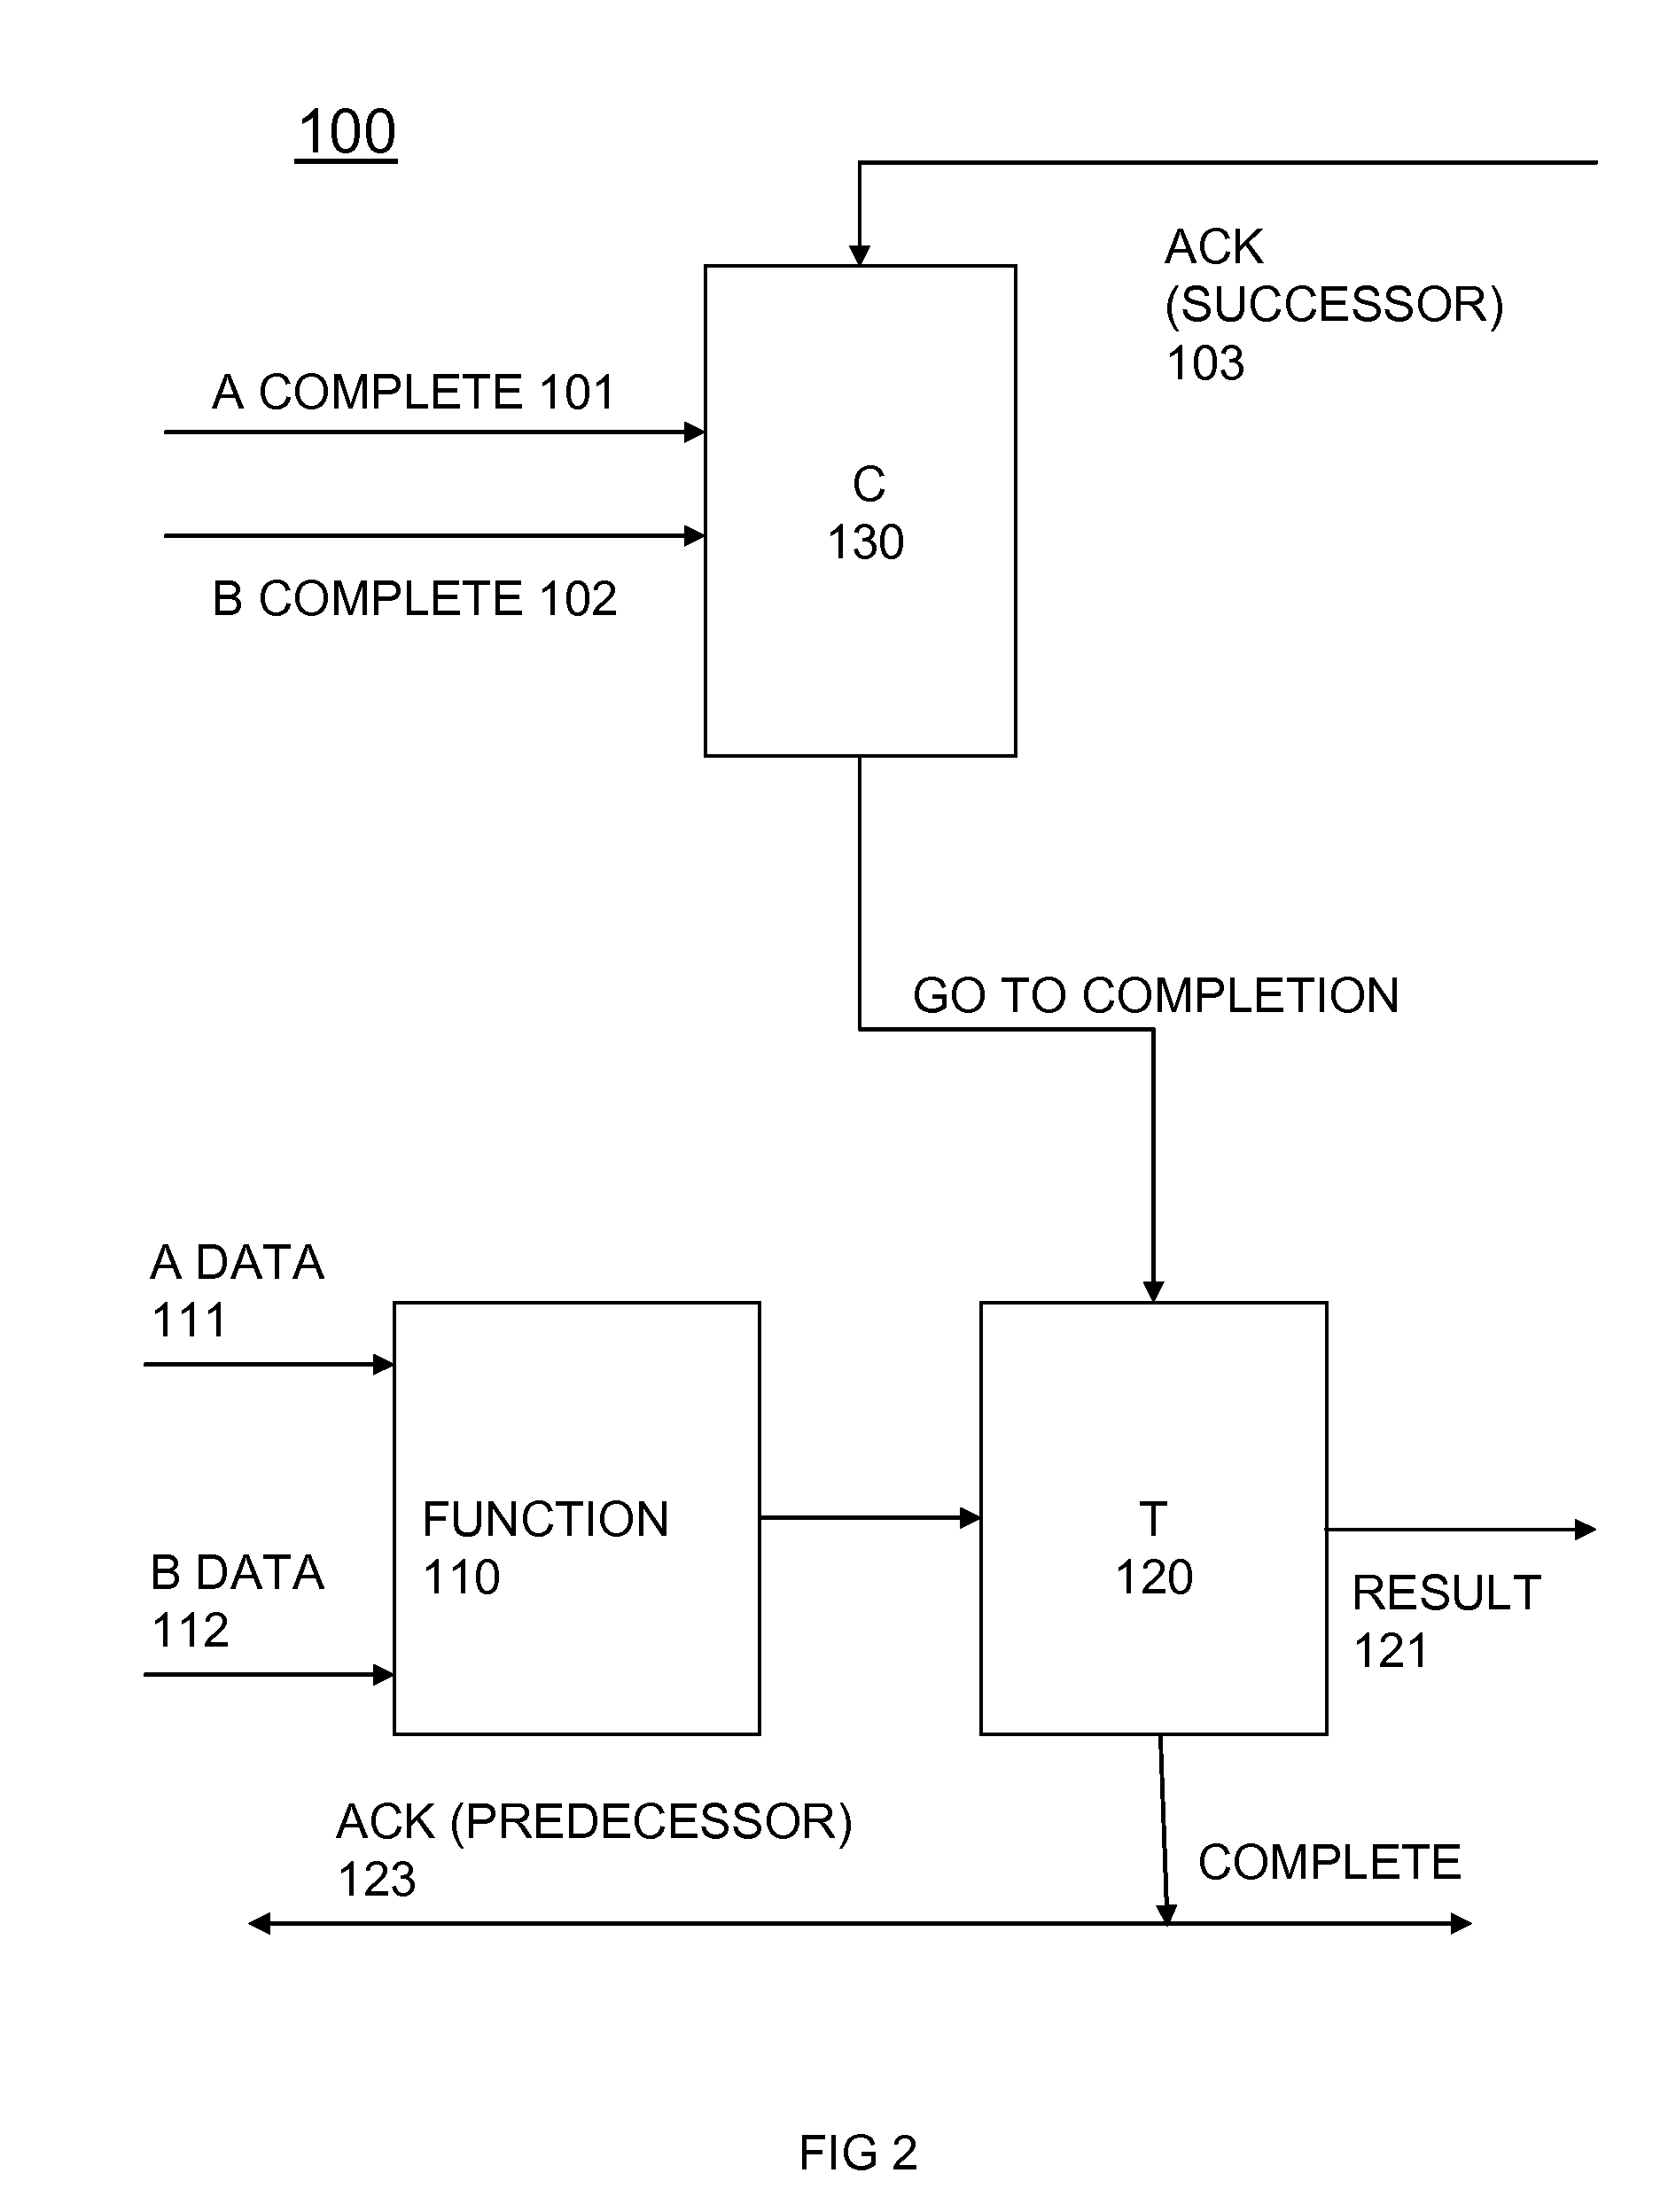 Method for delay immune and accelerated evaluation of digital circuits by compiling asynchronous completion handshaking means